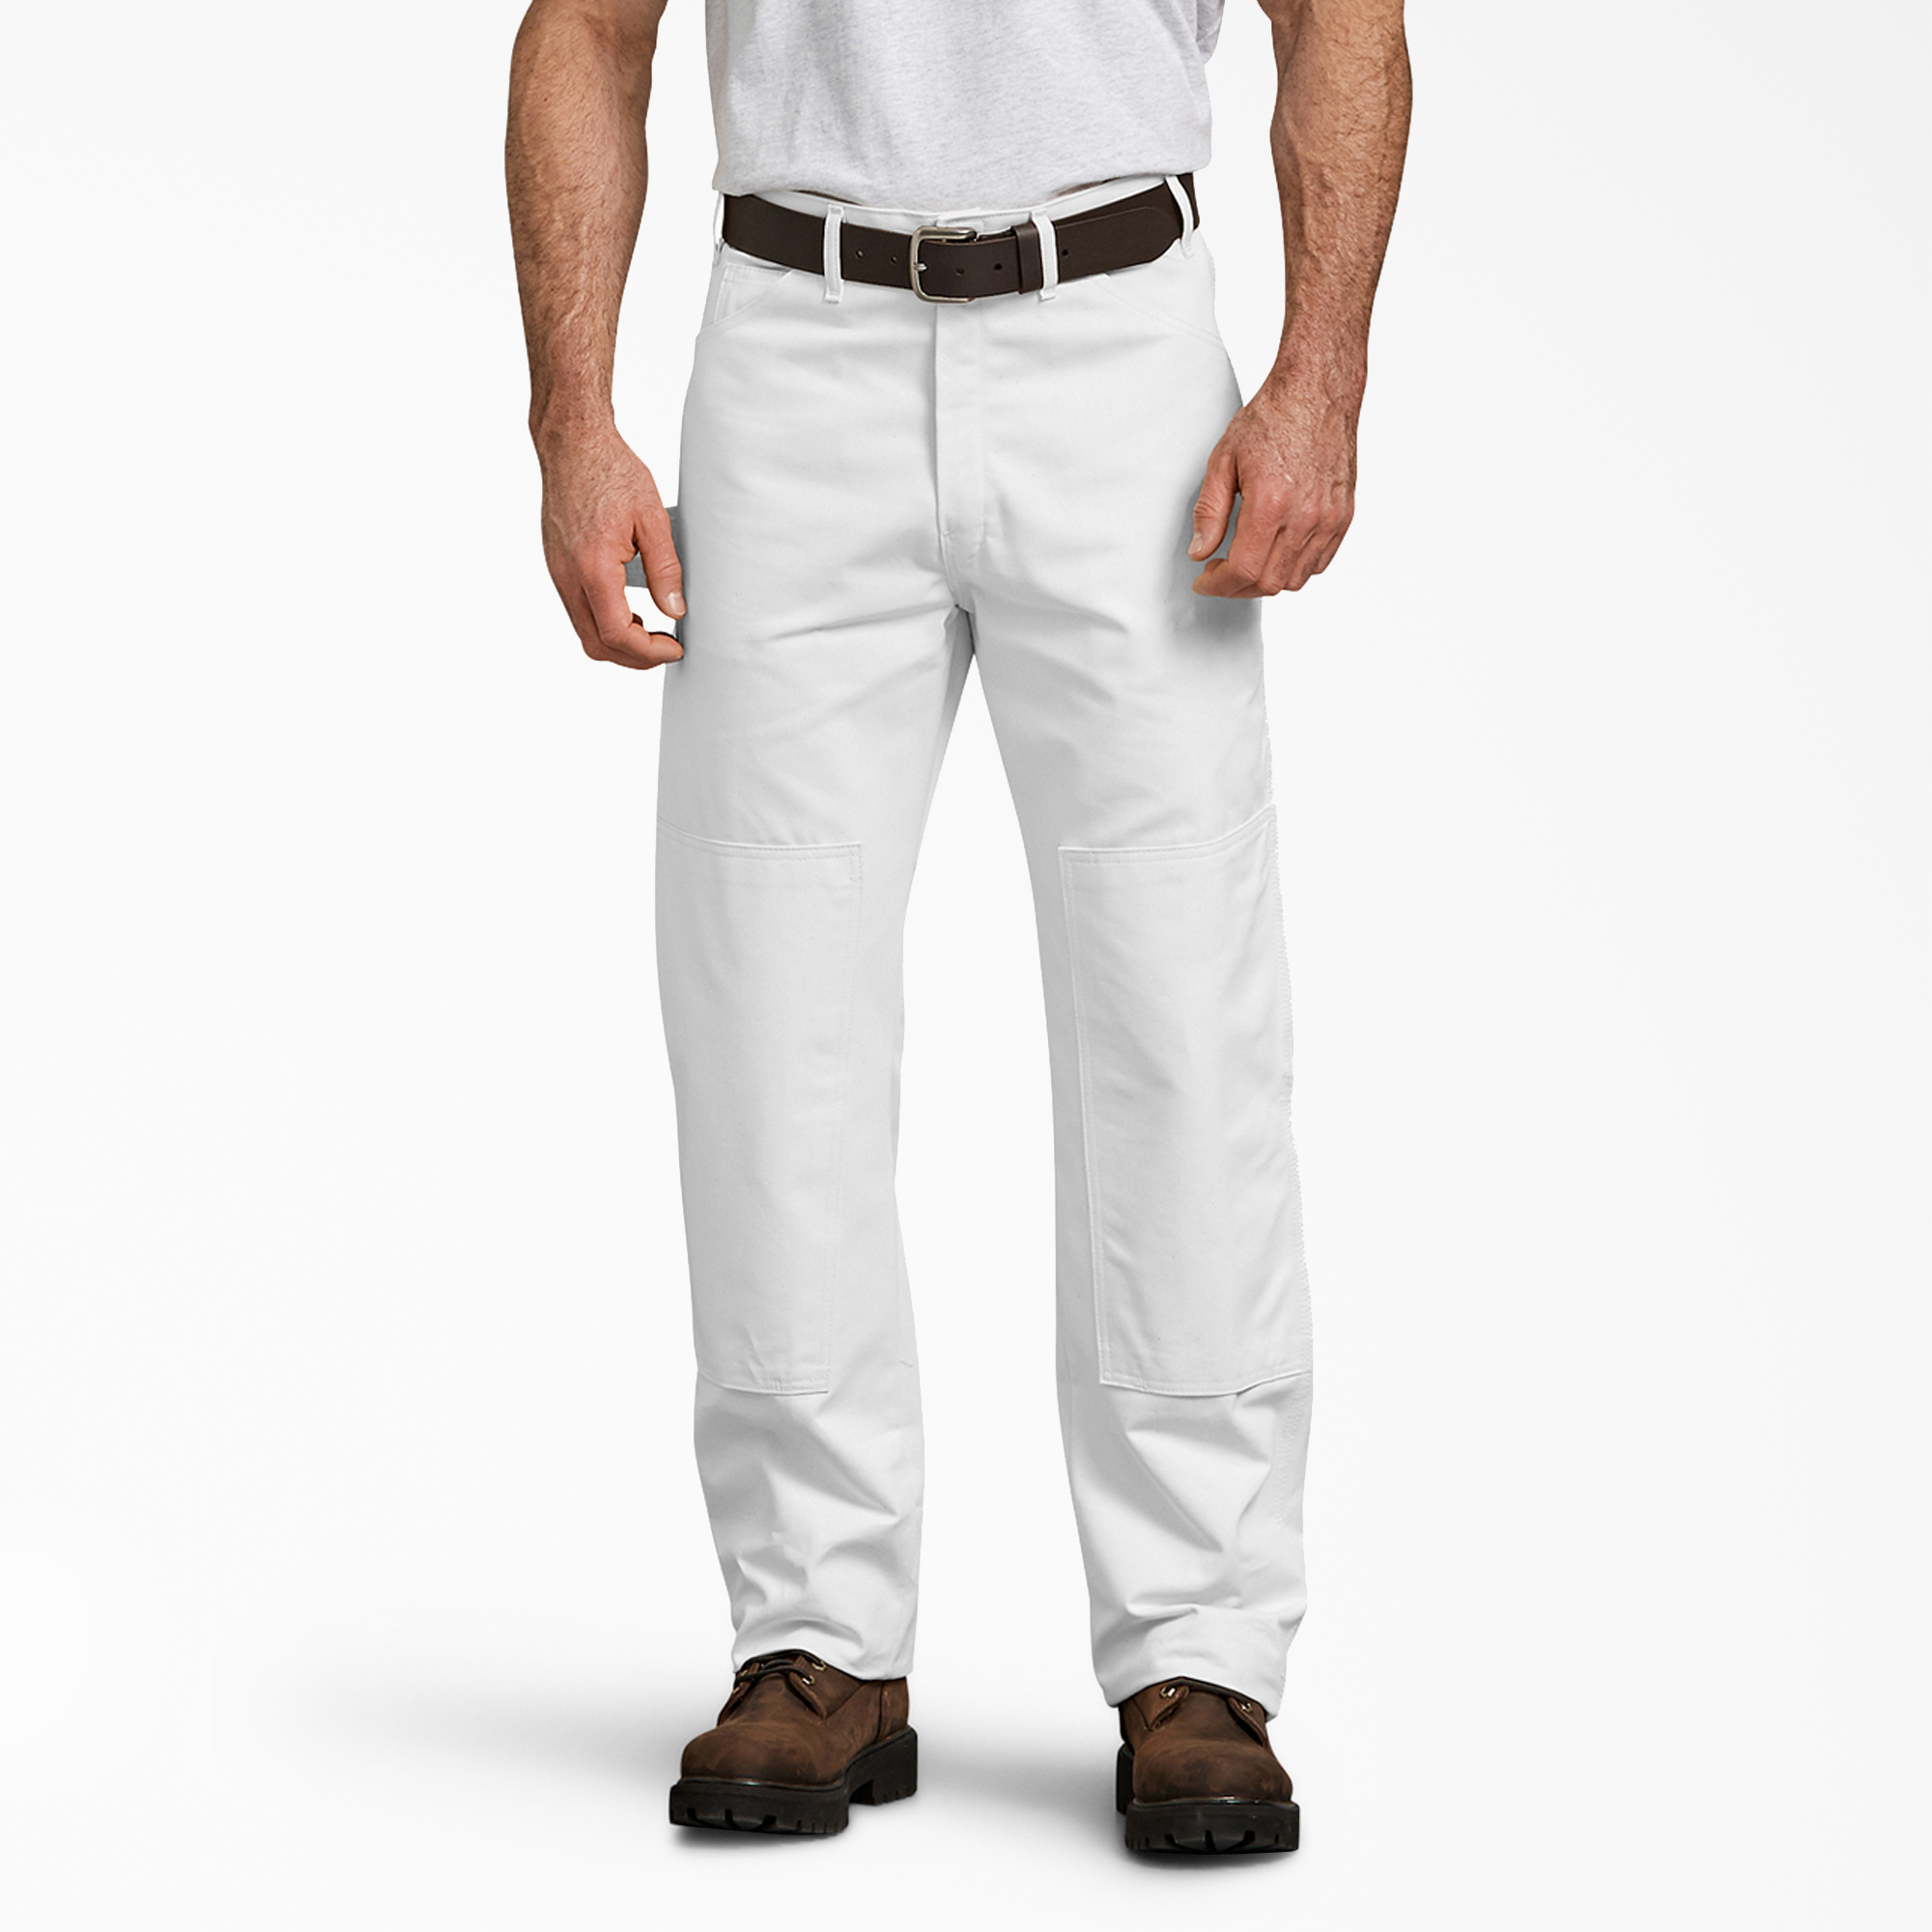 Painter's Double Knee Utility Pants - White (WH)